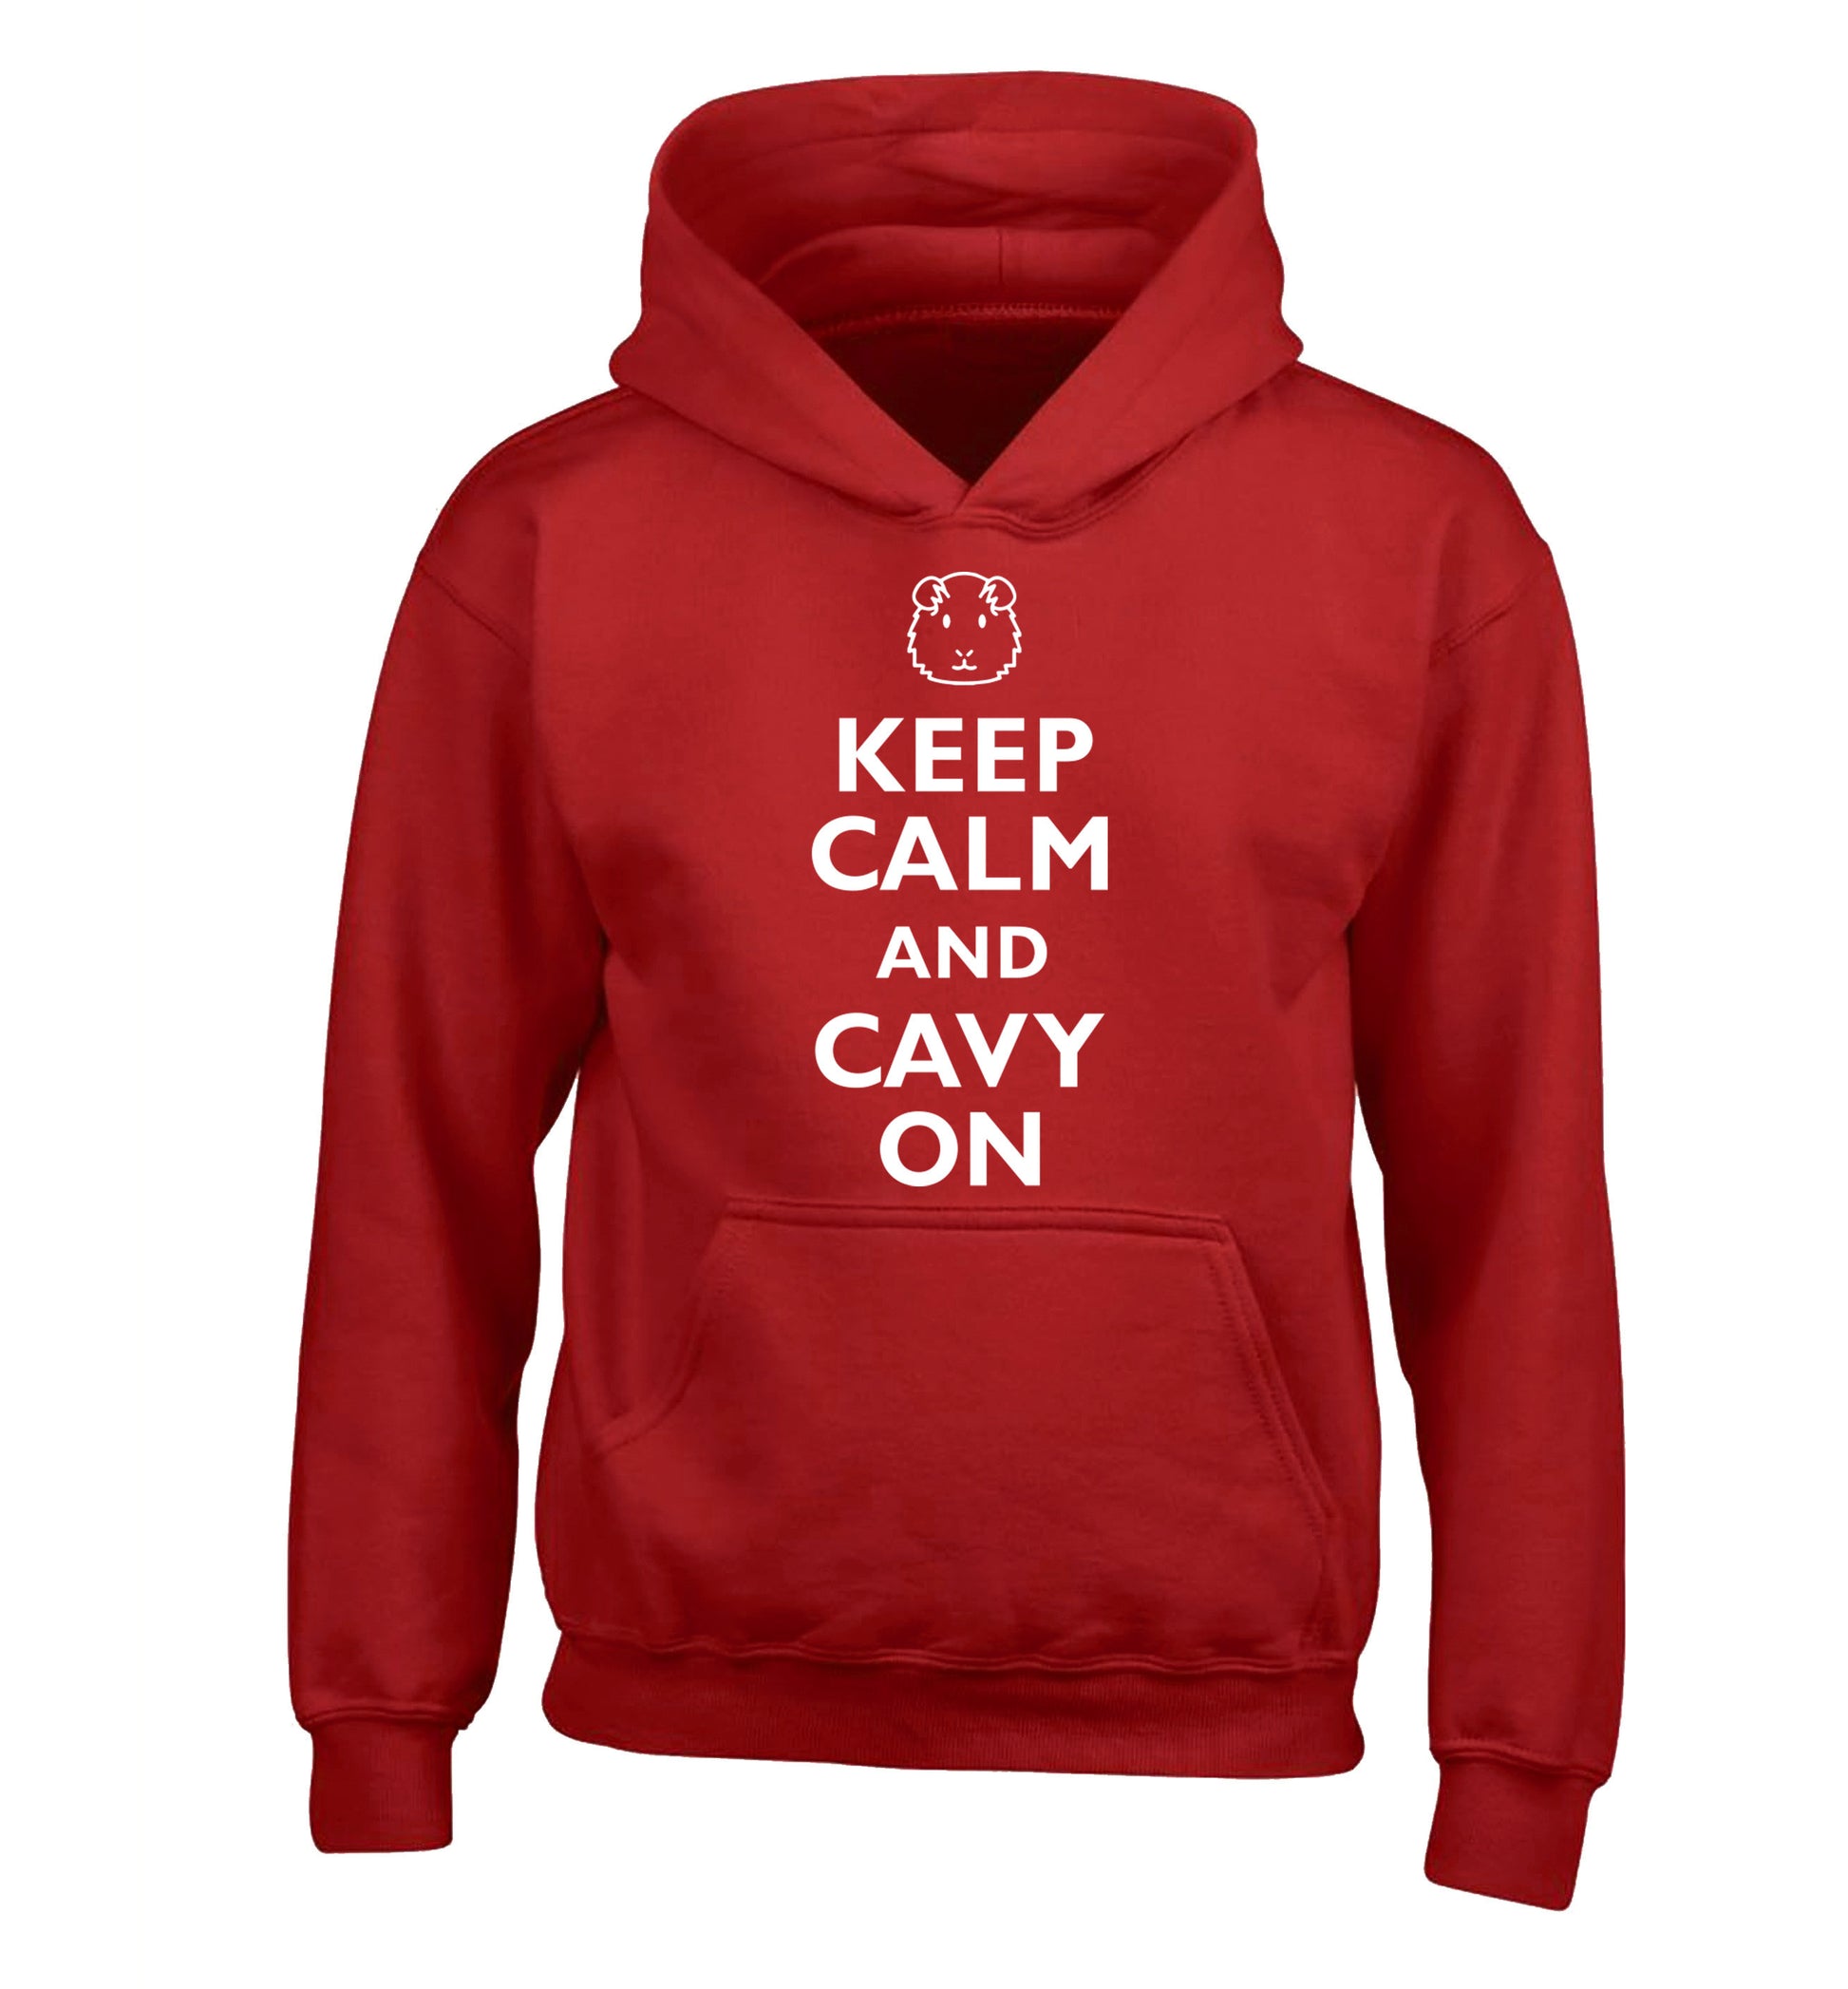 Keep calm and cavvy on children's red hoodie 12-14 Years